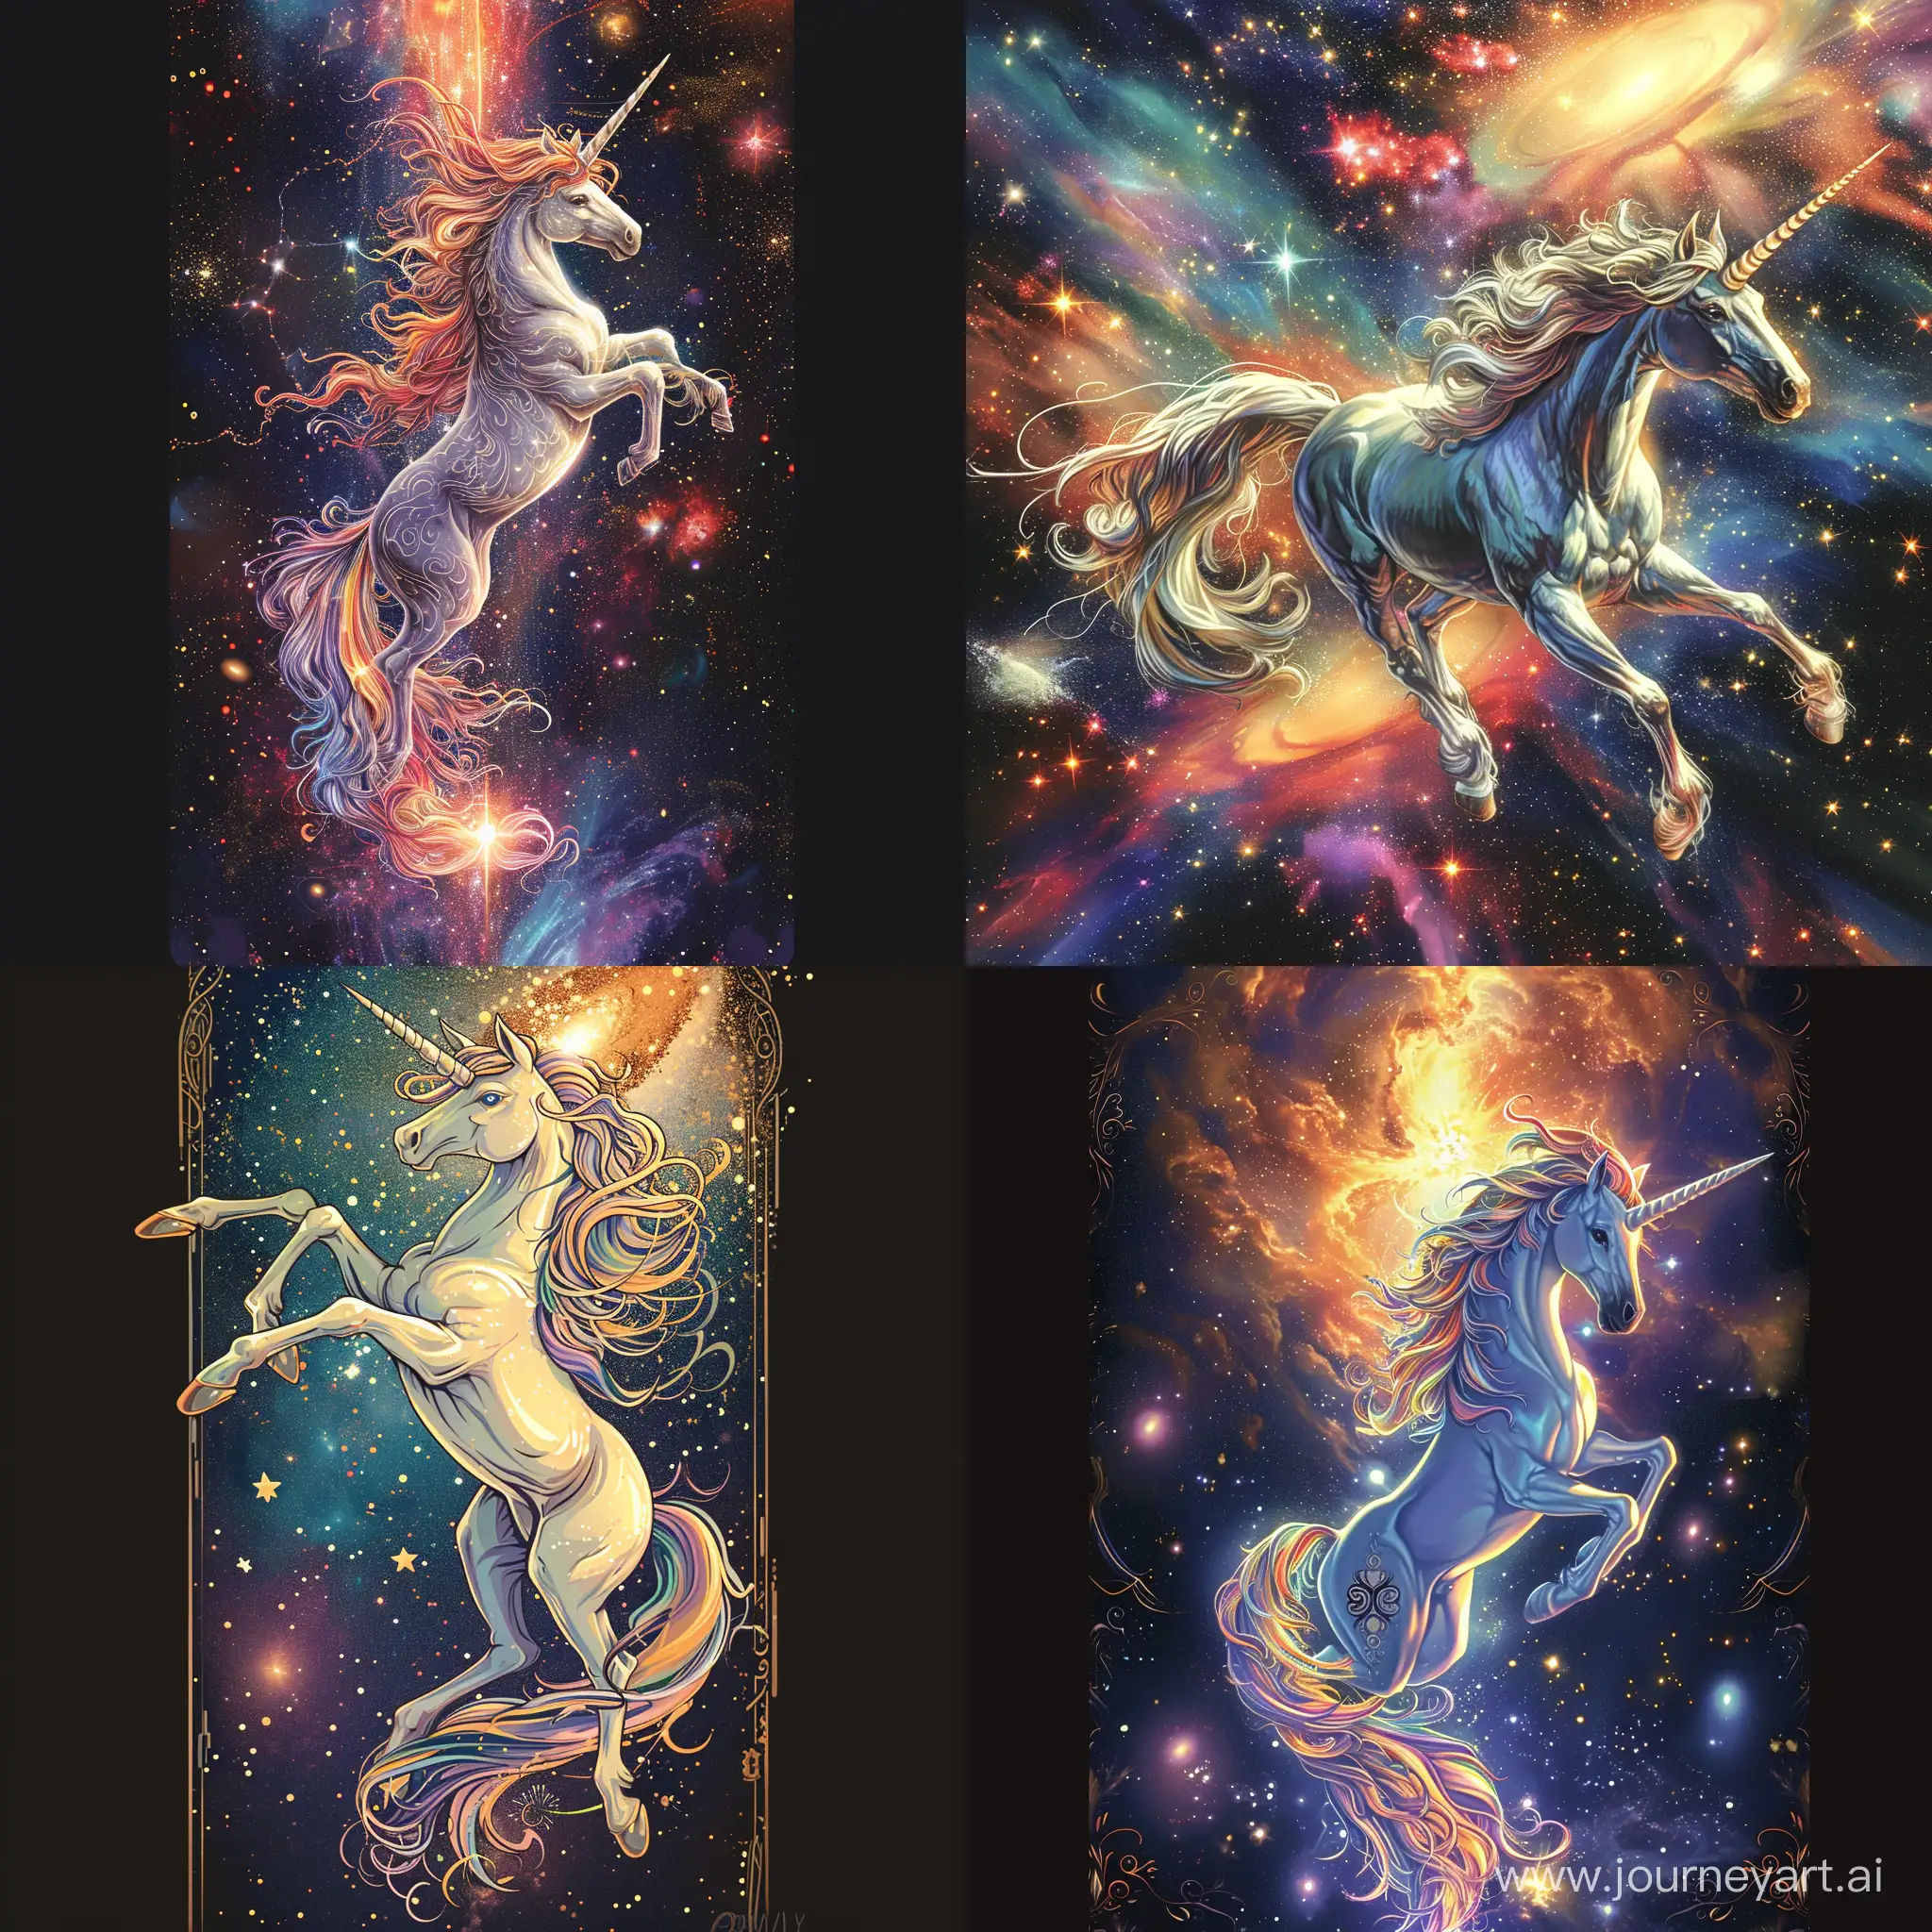 a bookmark a majestic Unicorn soaring through a cosmic galaxy, illustrated in intricate detail. The artwork portrays the unicorn's dynamic glide amidst the cosmic stars, its long tail creating a mesmerizing pattern against the galactic backdrop. Rich and vibrant colors intensify the celestial setting, emphasizing the unicorn's grandeur. The unicorn displays an aura of strength and nobility through its expression. The lighting highlights the unicorn's intricate details against the cosmic expanse. Pro vector, perfect MINIMALISTIC art HIGH QUALITY details, Ultra high details, full design, victoria, vibrant vector, deep lines, heavy strokes.